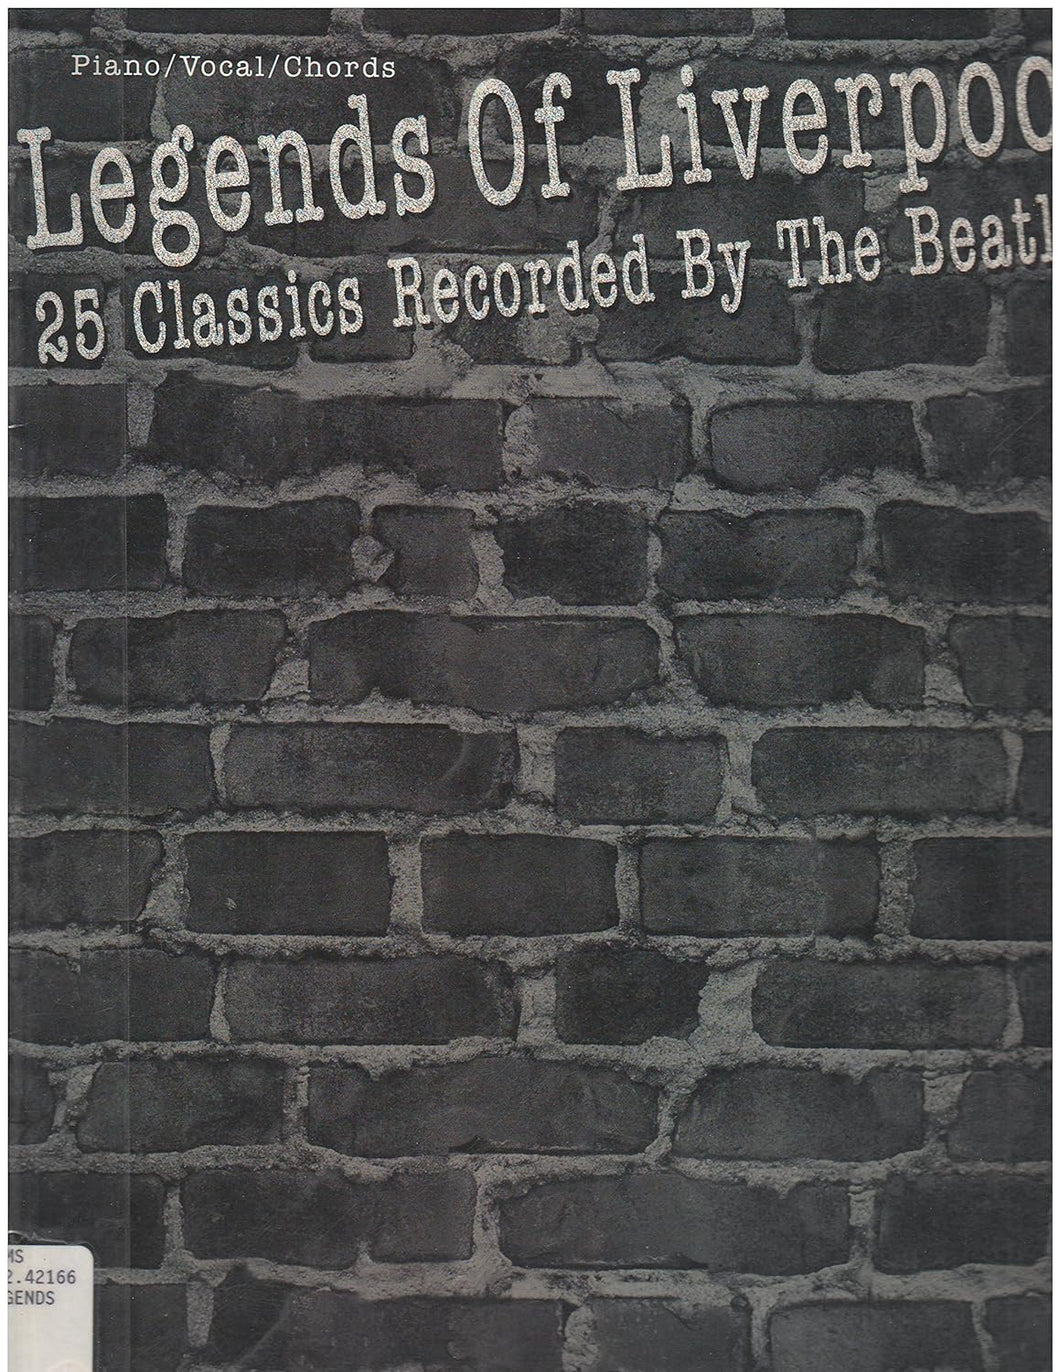 Legends of Liverpool - 25 Classics recorded by the Beatles